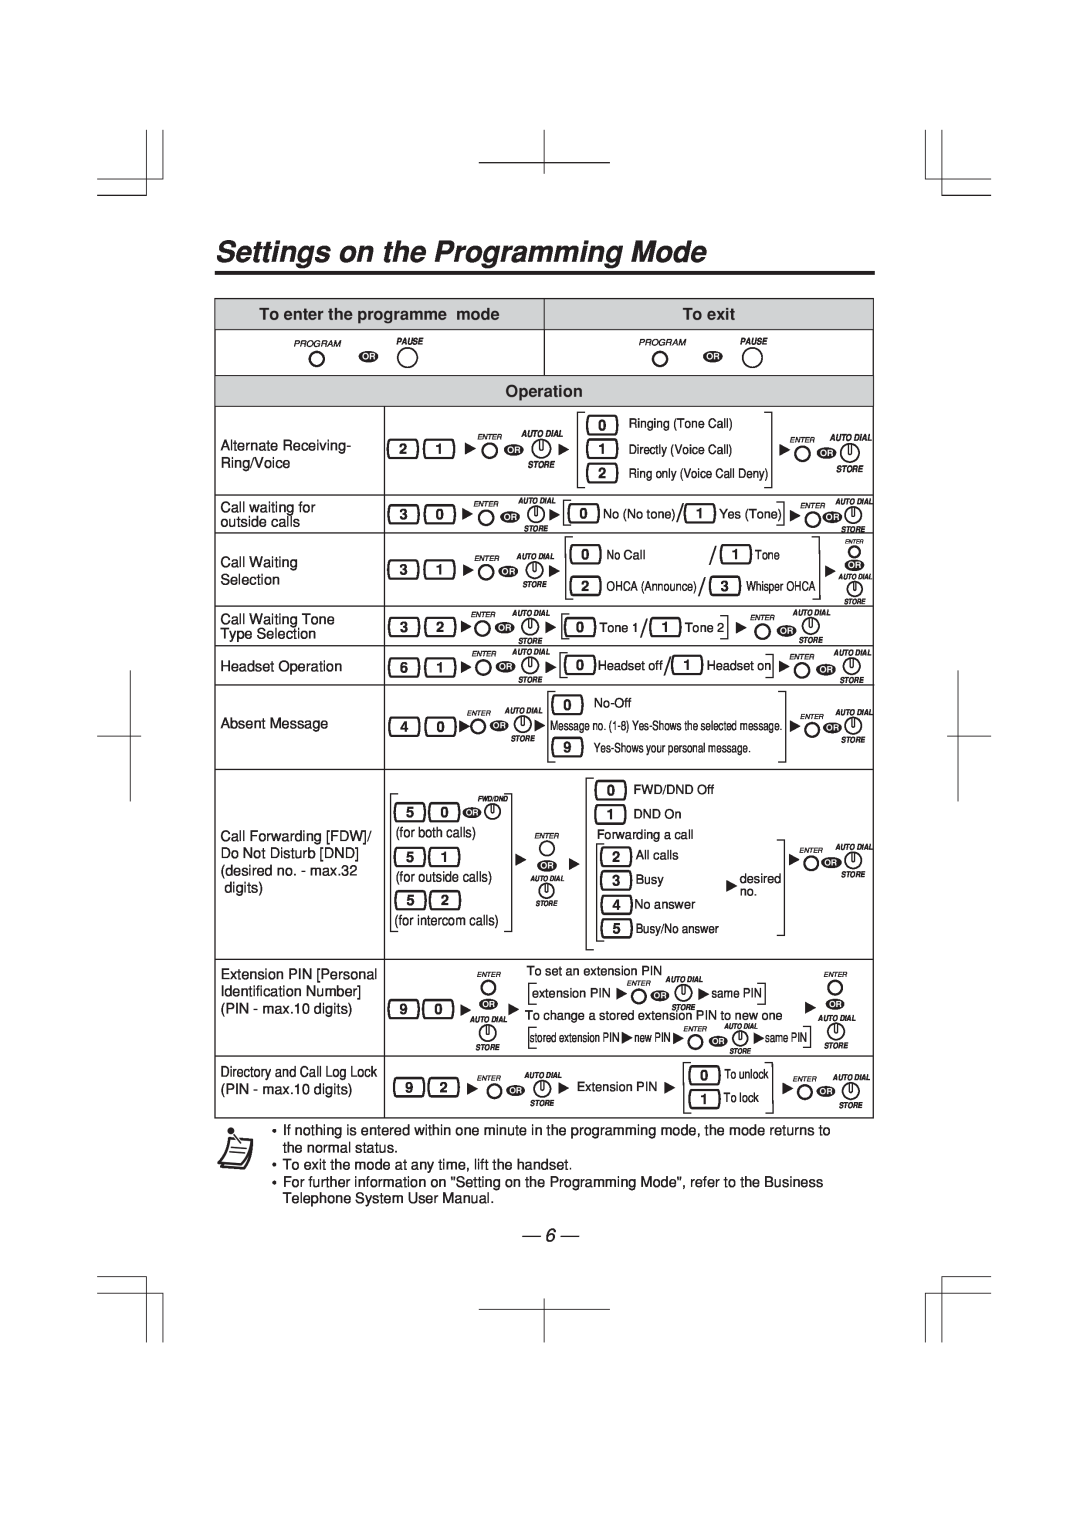 Panasonic KX-T7636E, KX-T7625E, KX-T7633E, KX-T7630E manual Settings on the Programming Mode 